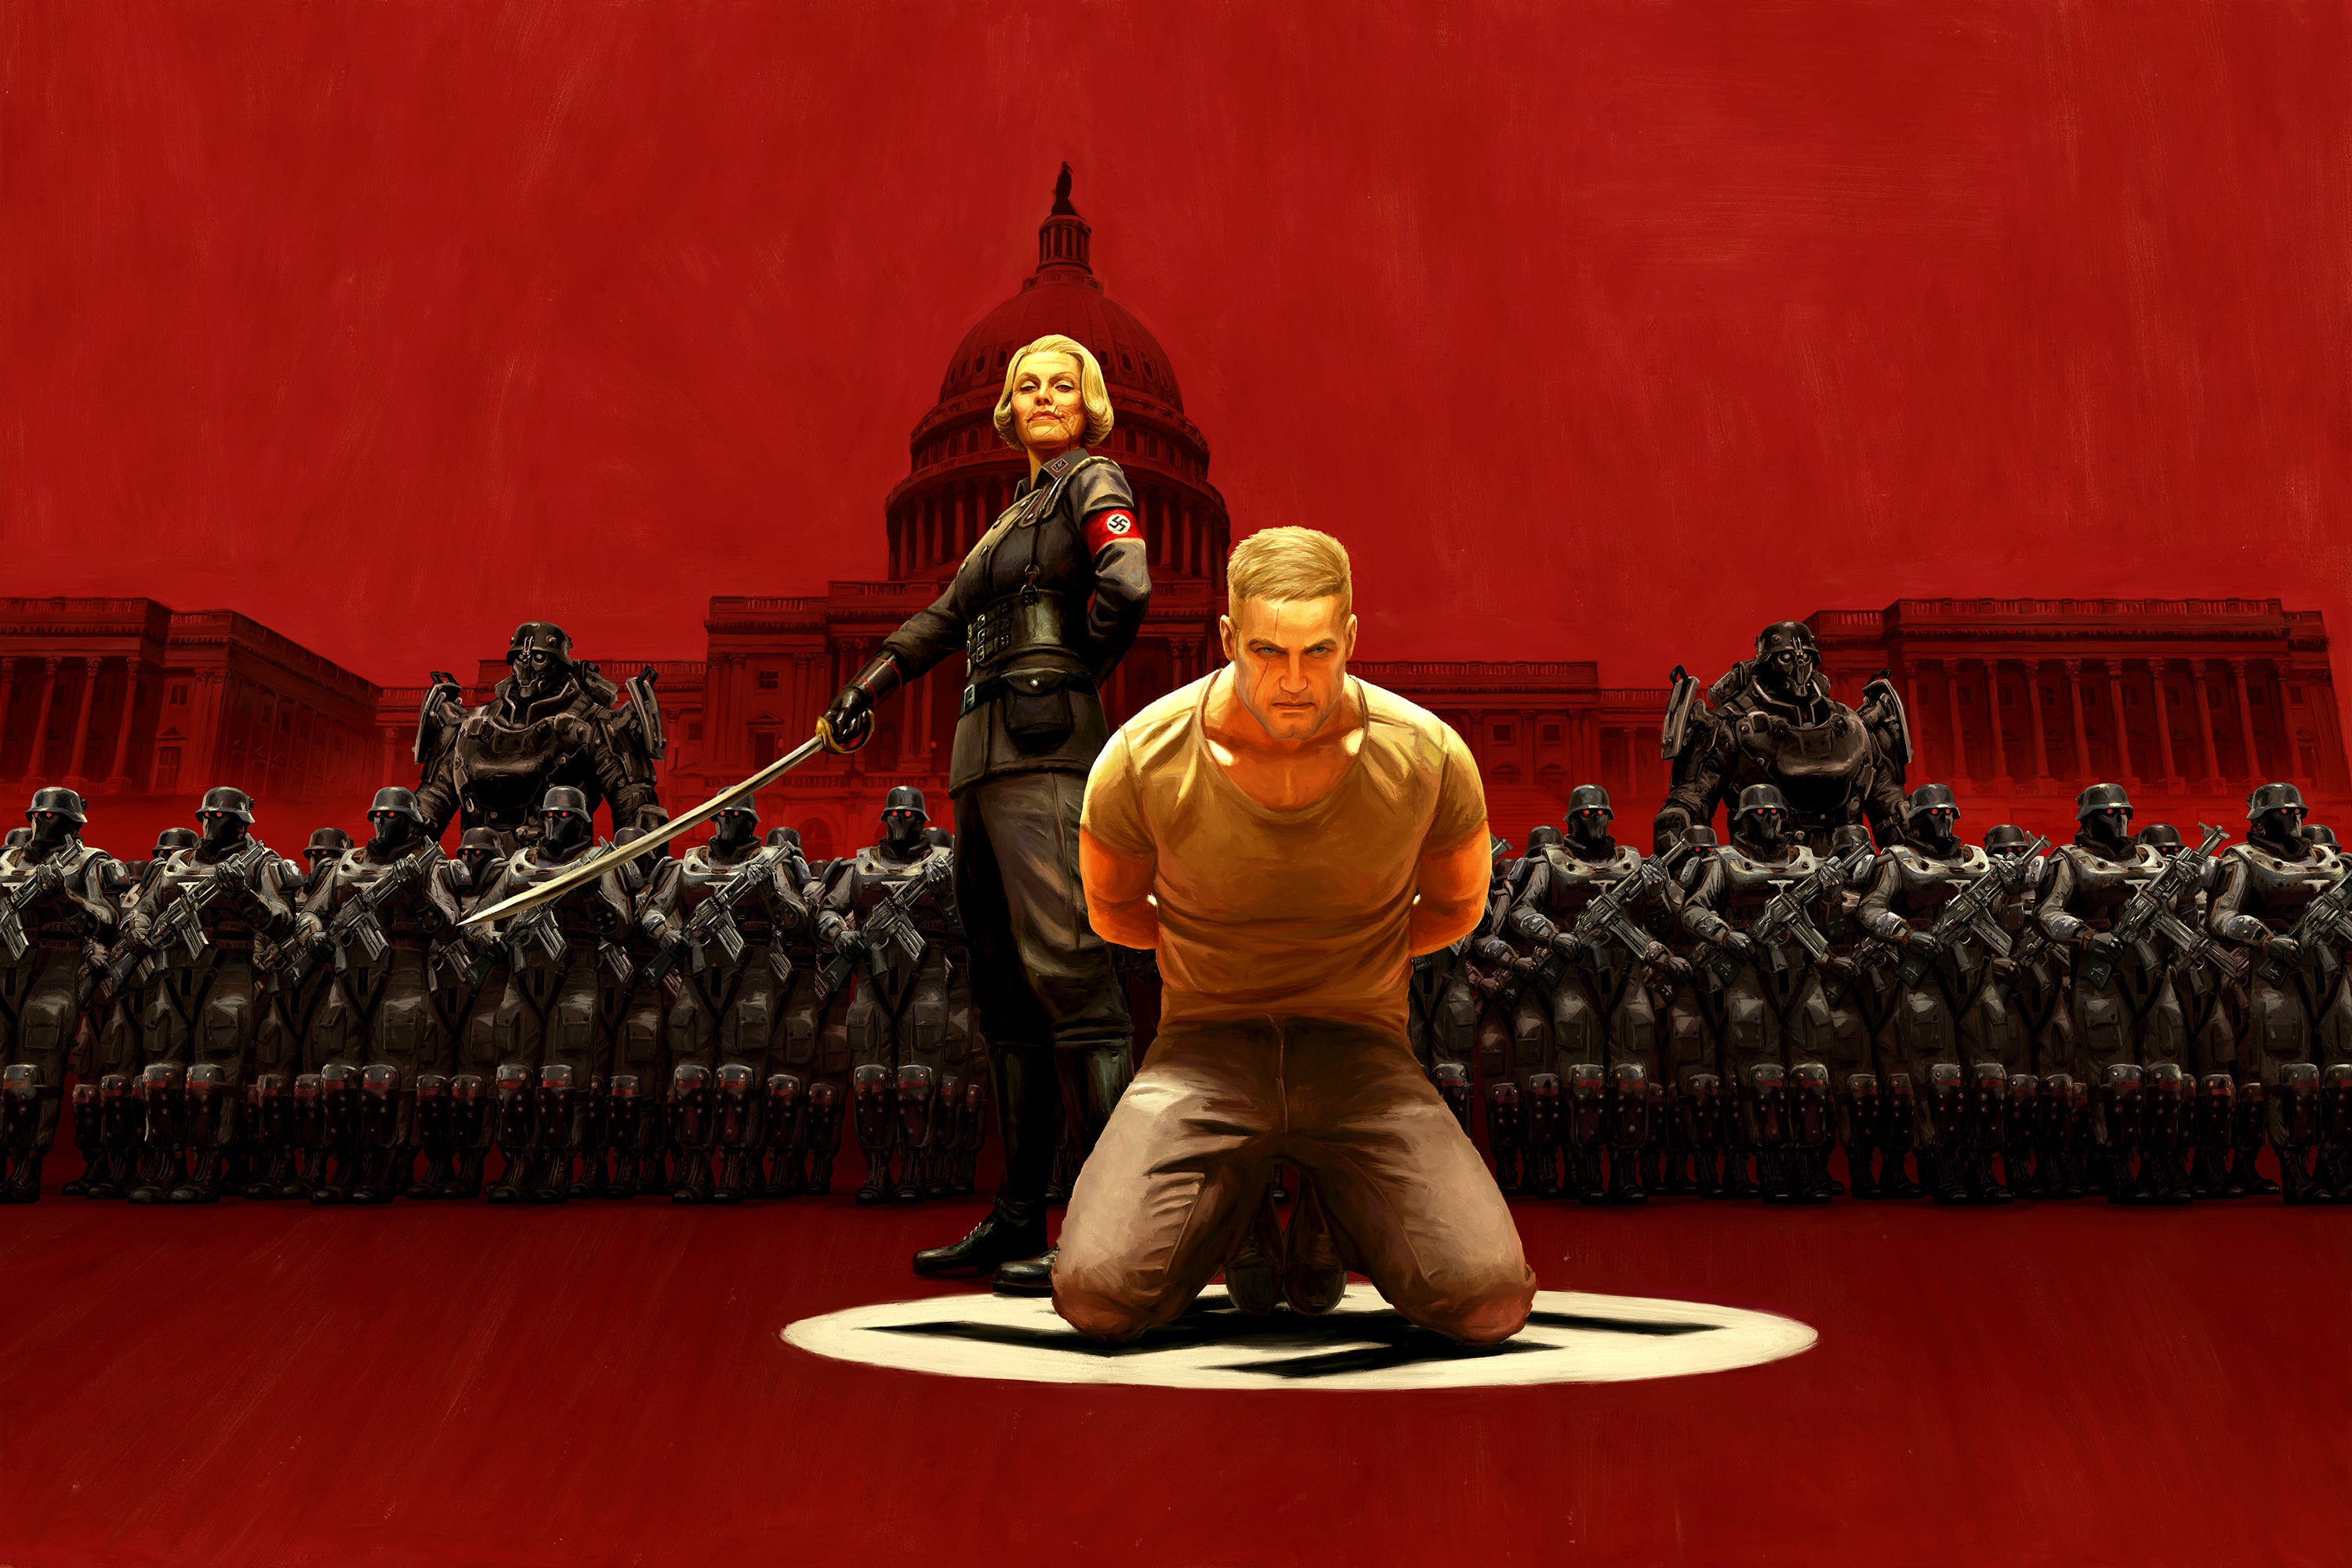 Promotional art from Wolfenstein II: The New Colossus, featuring a Nazi officer holding a sword as a man sits on his knees, bound.